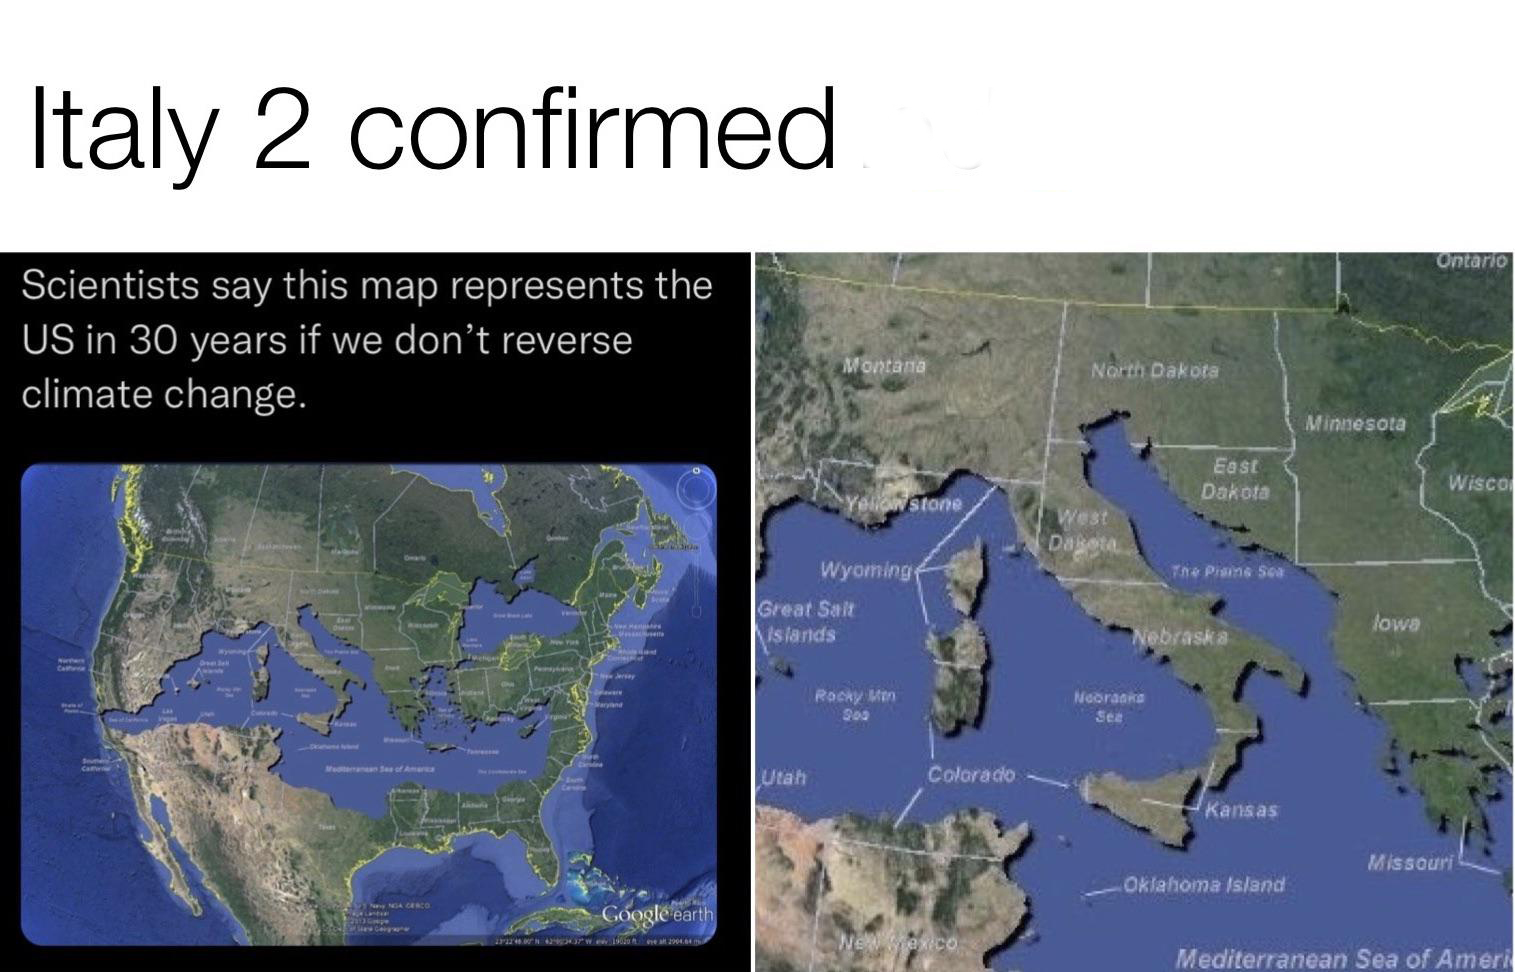 funny memes - dank memes - water resources - Italy 2 confirmed Scientists say this map represents the Us in 30 years if we don't reverse climate change. Northern Medan Ses of America darge aryand Google earth 27124.028 424037W e19020 eve alt 2004.64 m2 Mo